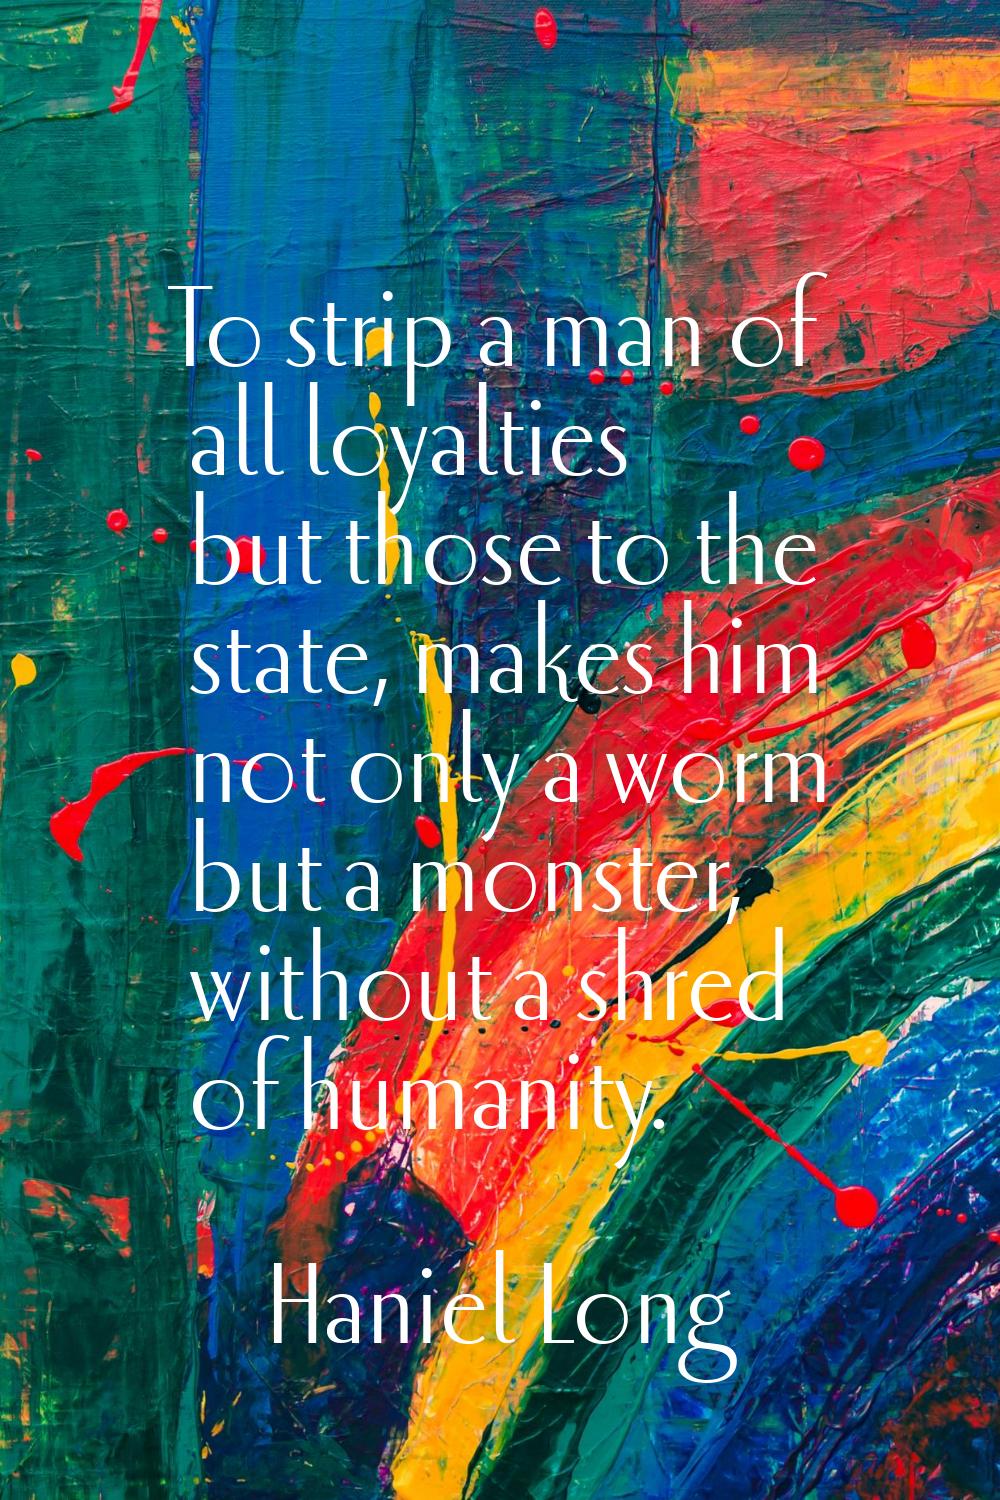 To strip a man of all loyalties but those to the state, makes him not only a worm but a monster, wi